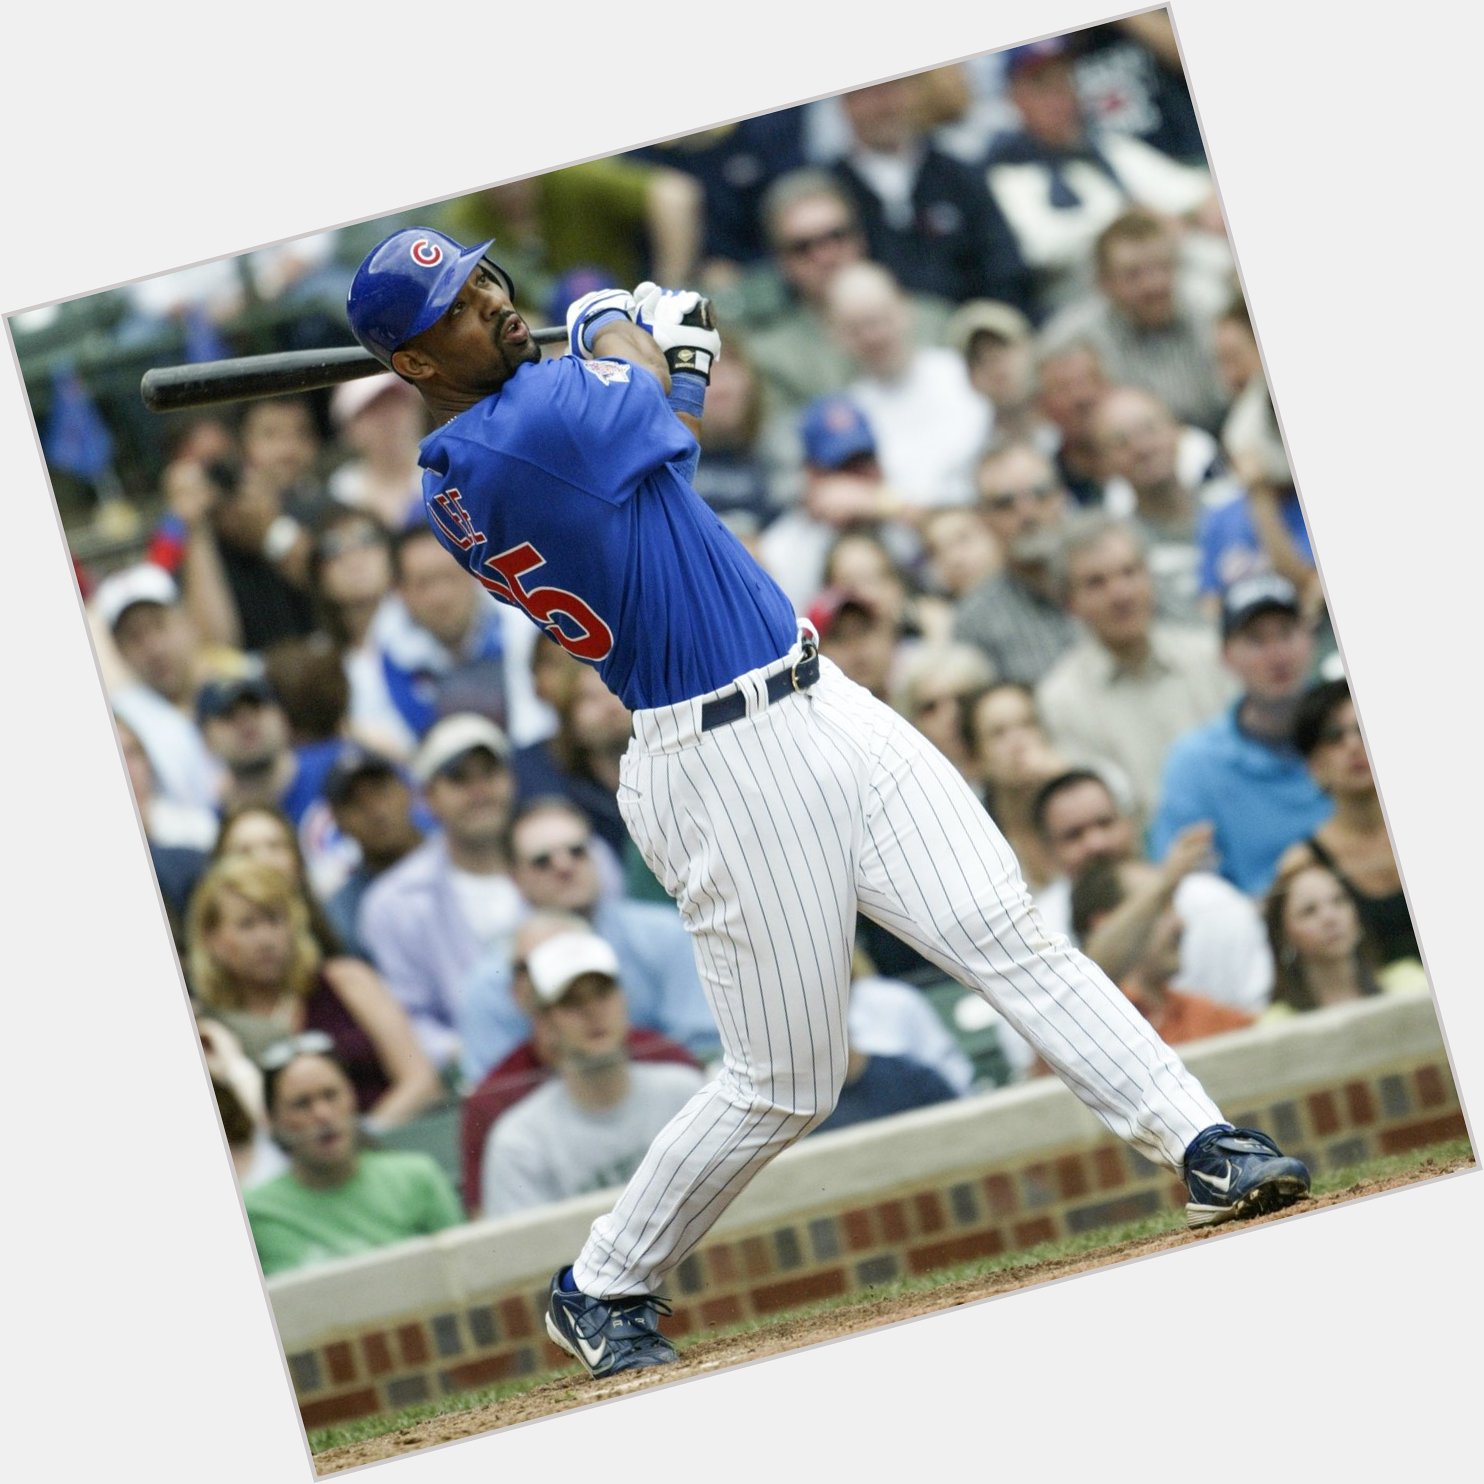 Happy birthday Derrek Lee!

D-Lee\s 1st home run at Wrigley Field as a Cub was a grand slam against the Reds 